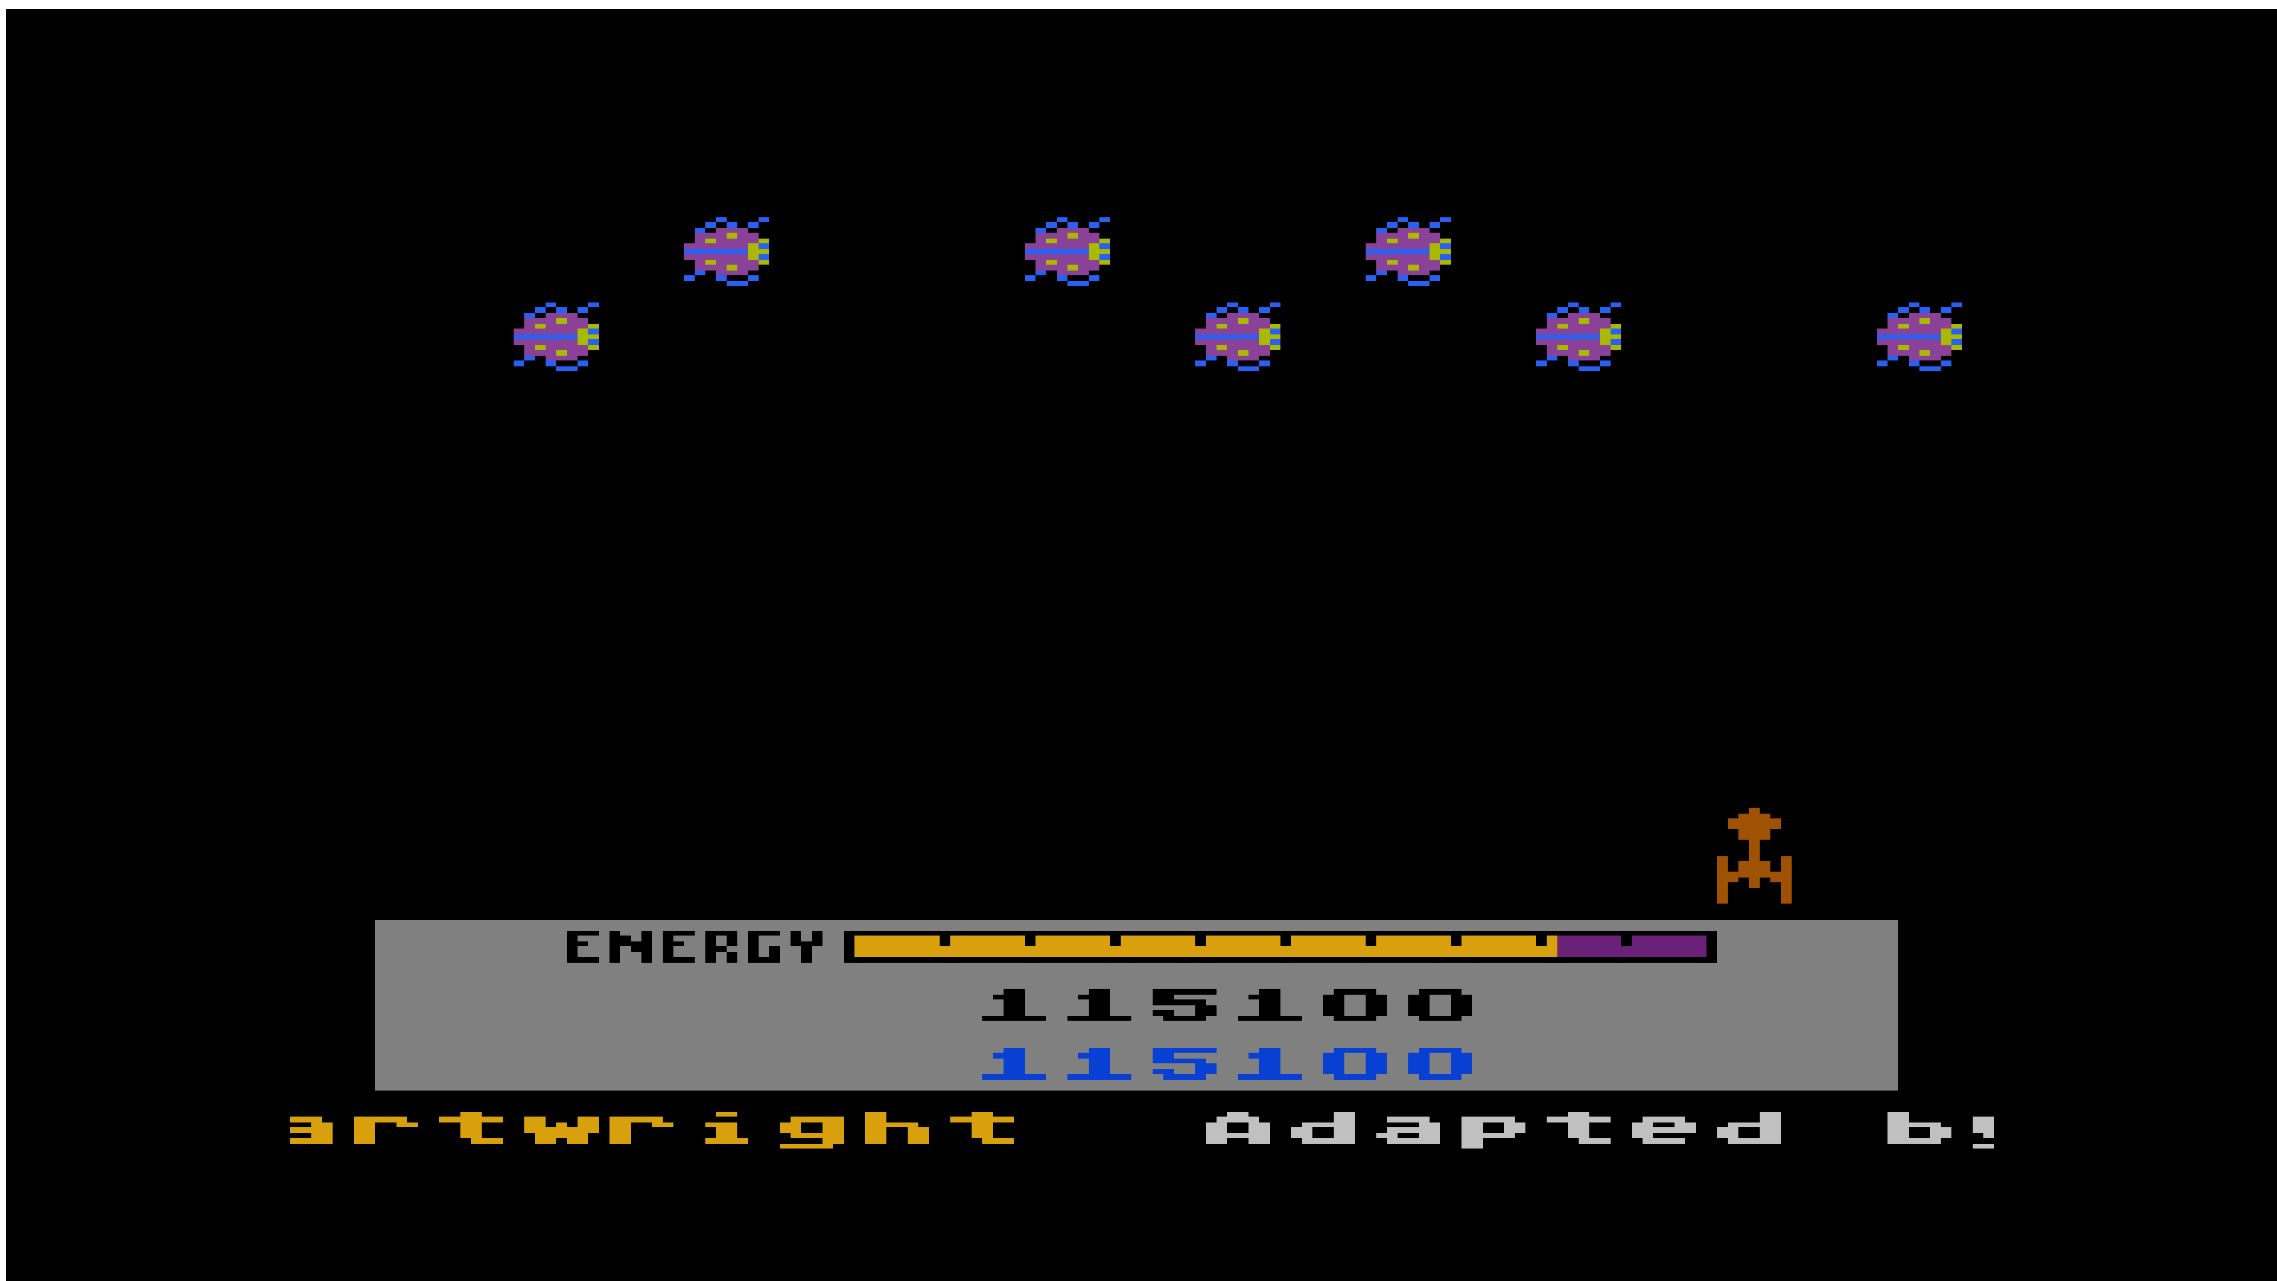 mikvaporup: Megamania [Guided Missiles] (Atari 5200 Emulated) 115,100 points on 2019-08-17 05:25:31